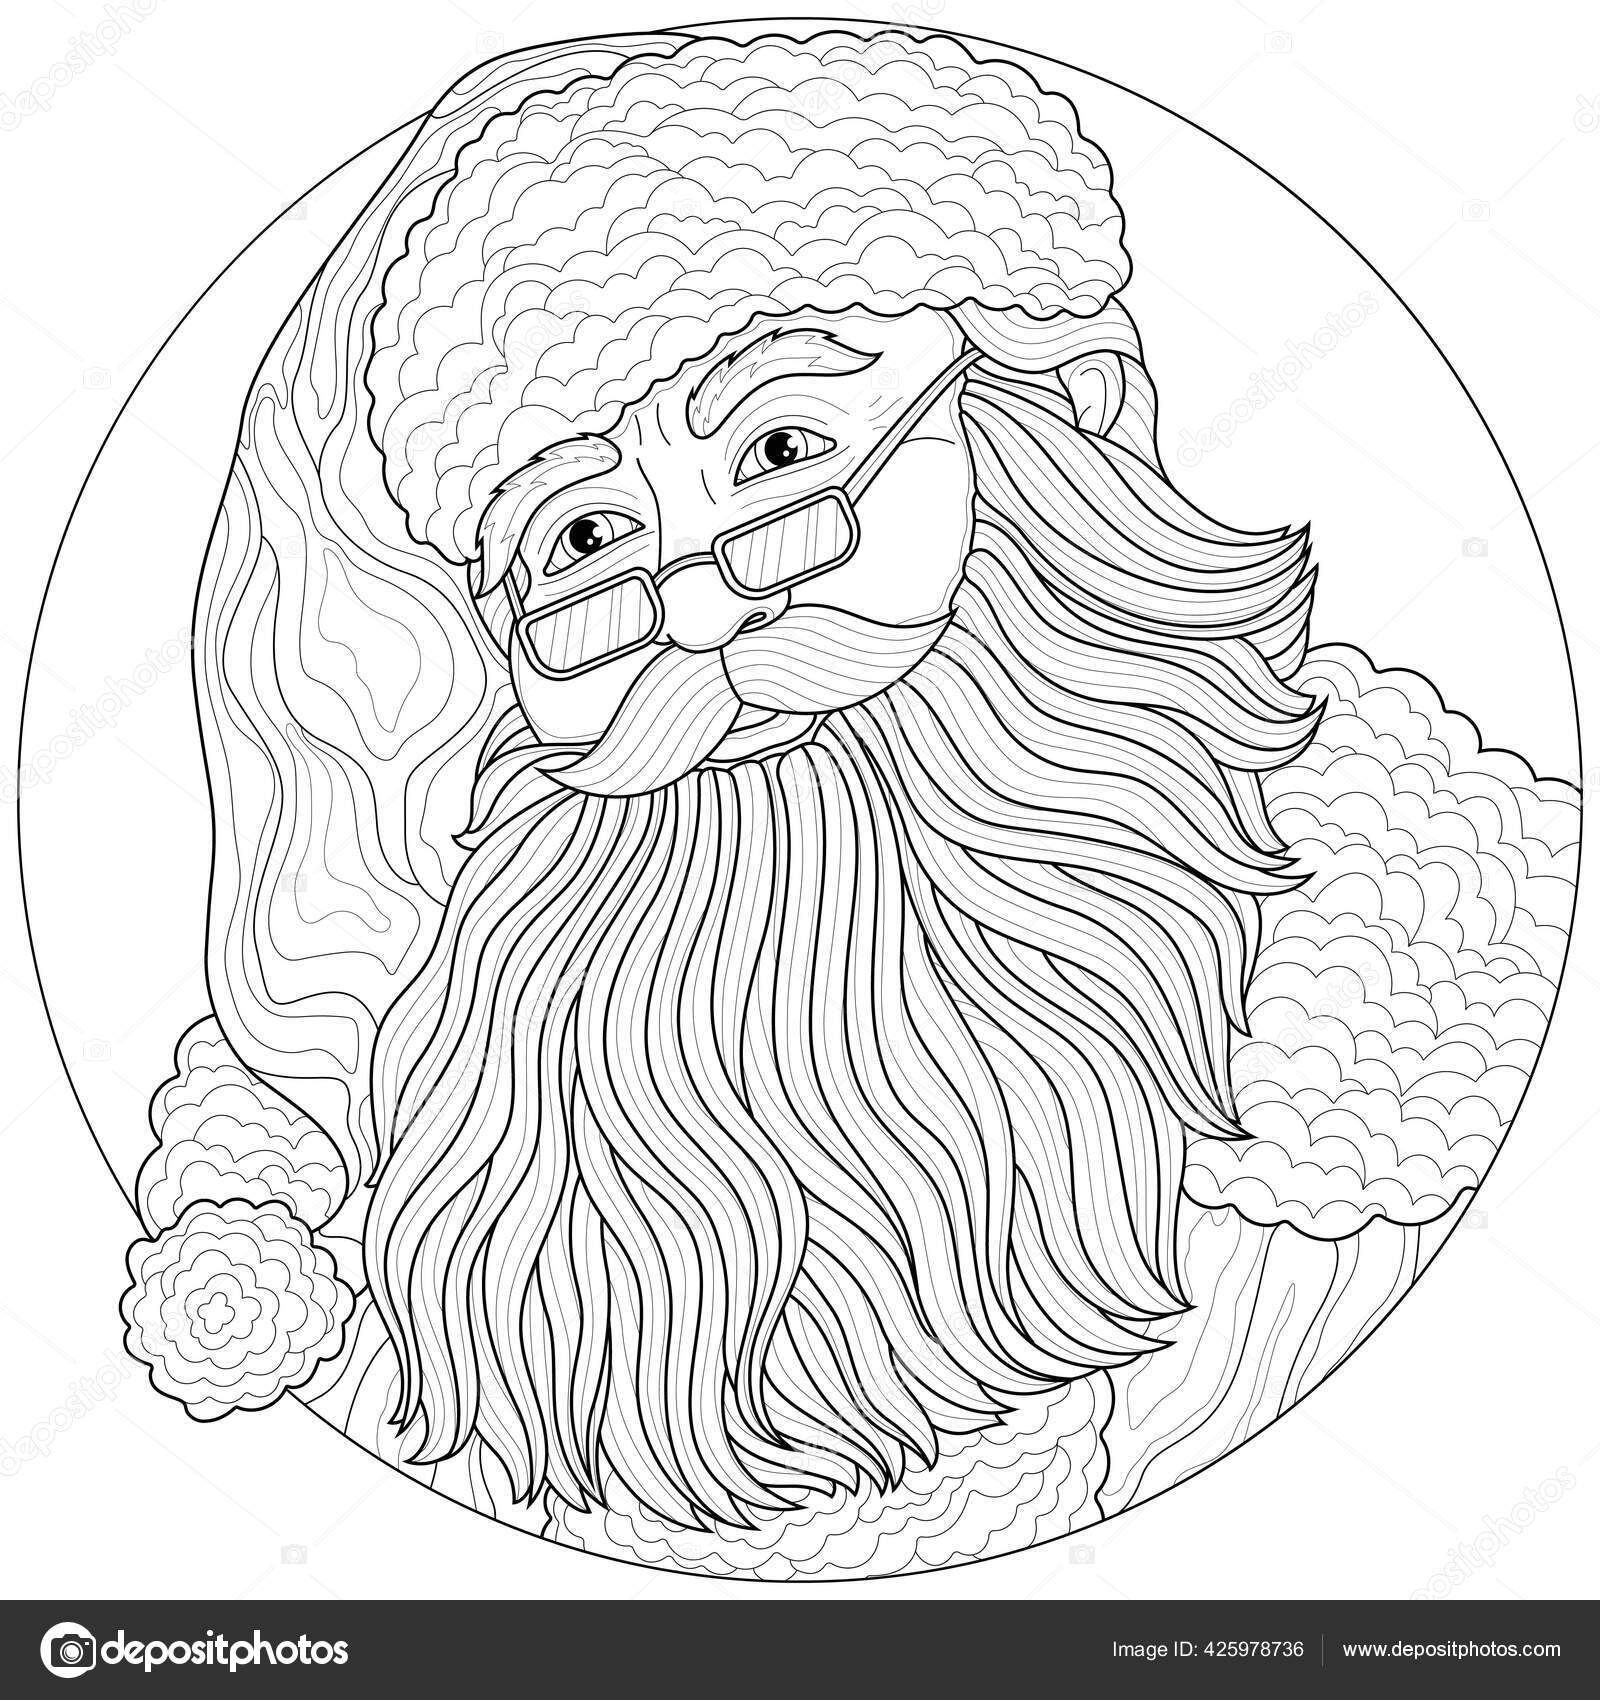 Santa claus coloring book antistress children adults illustration isolated white stock vector by vlasenkoekaterinkagmail